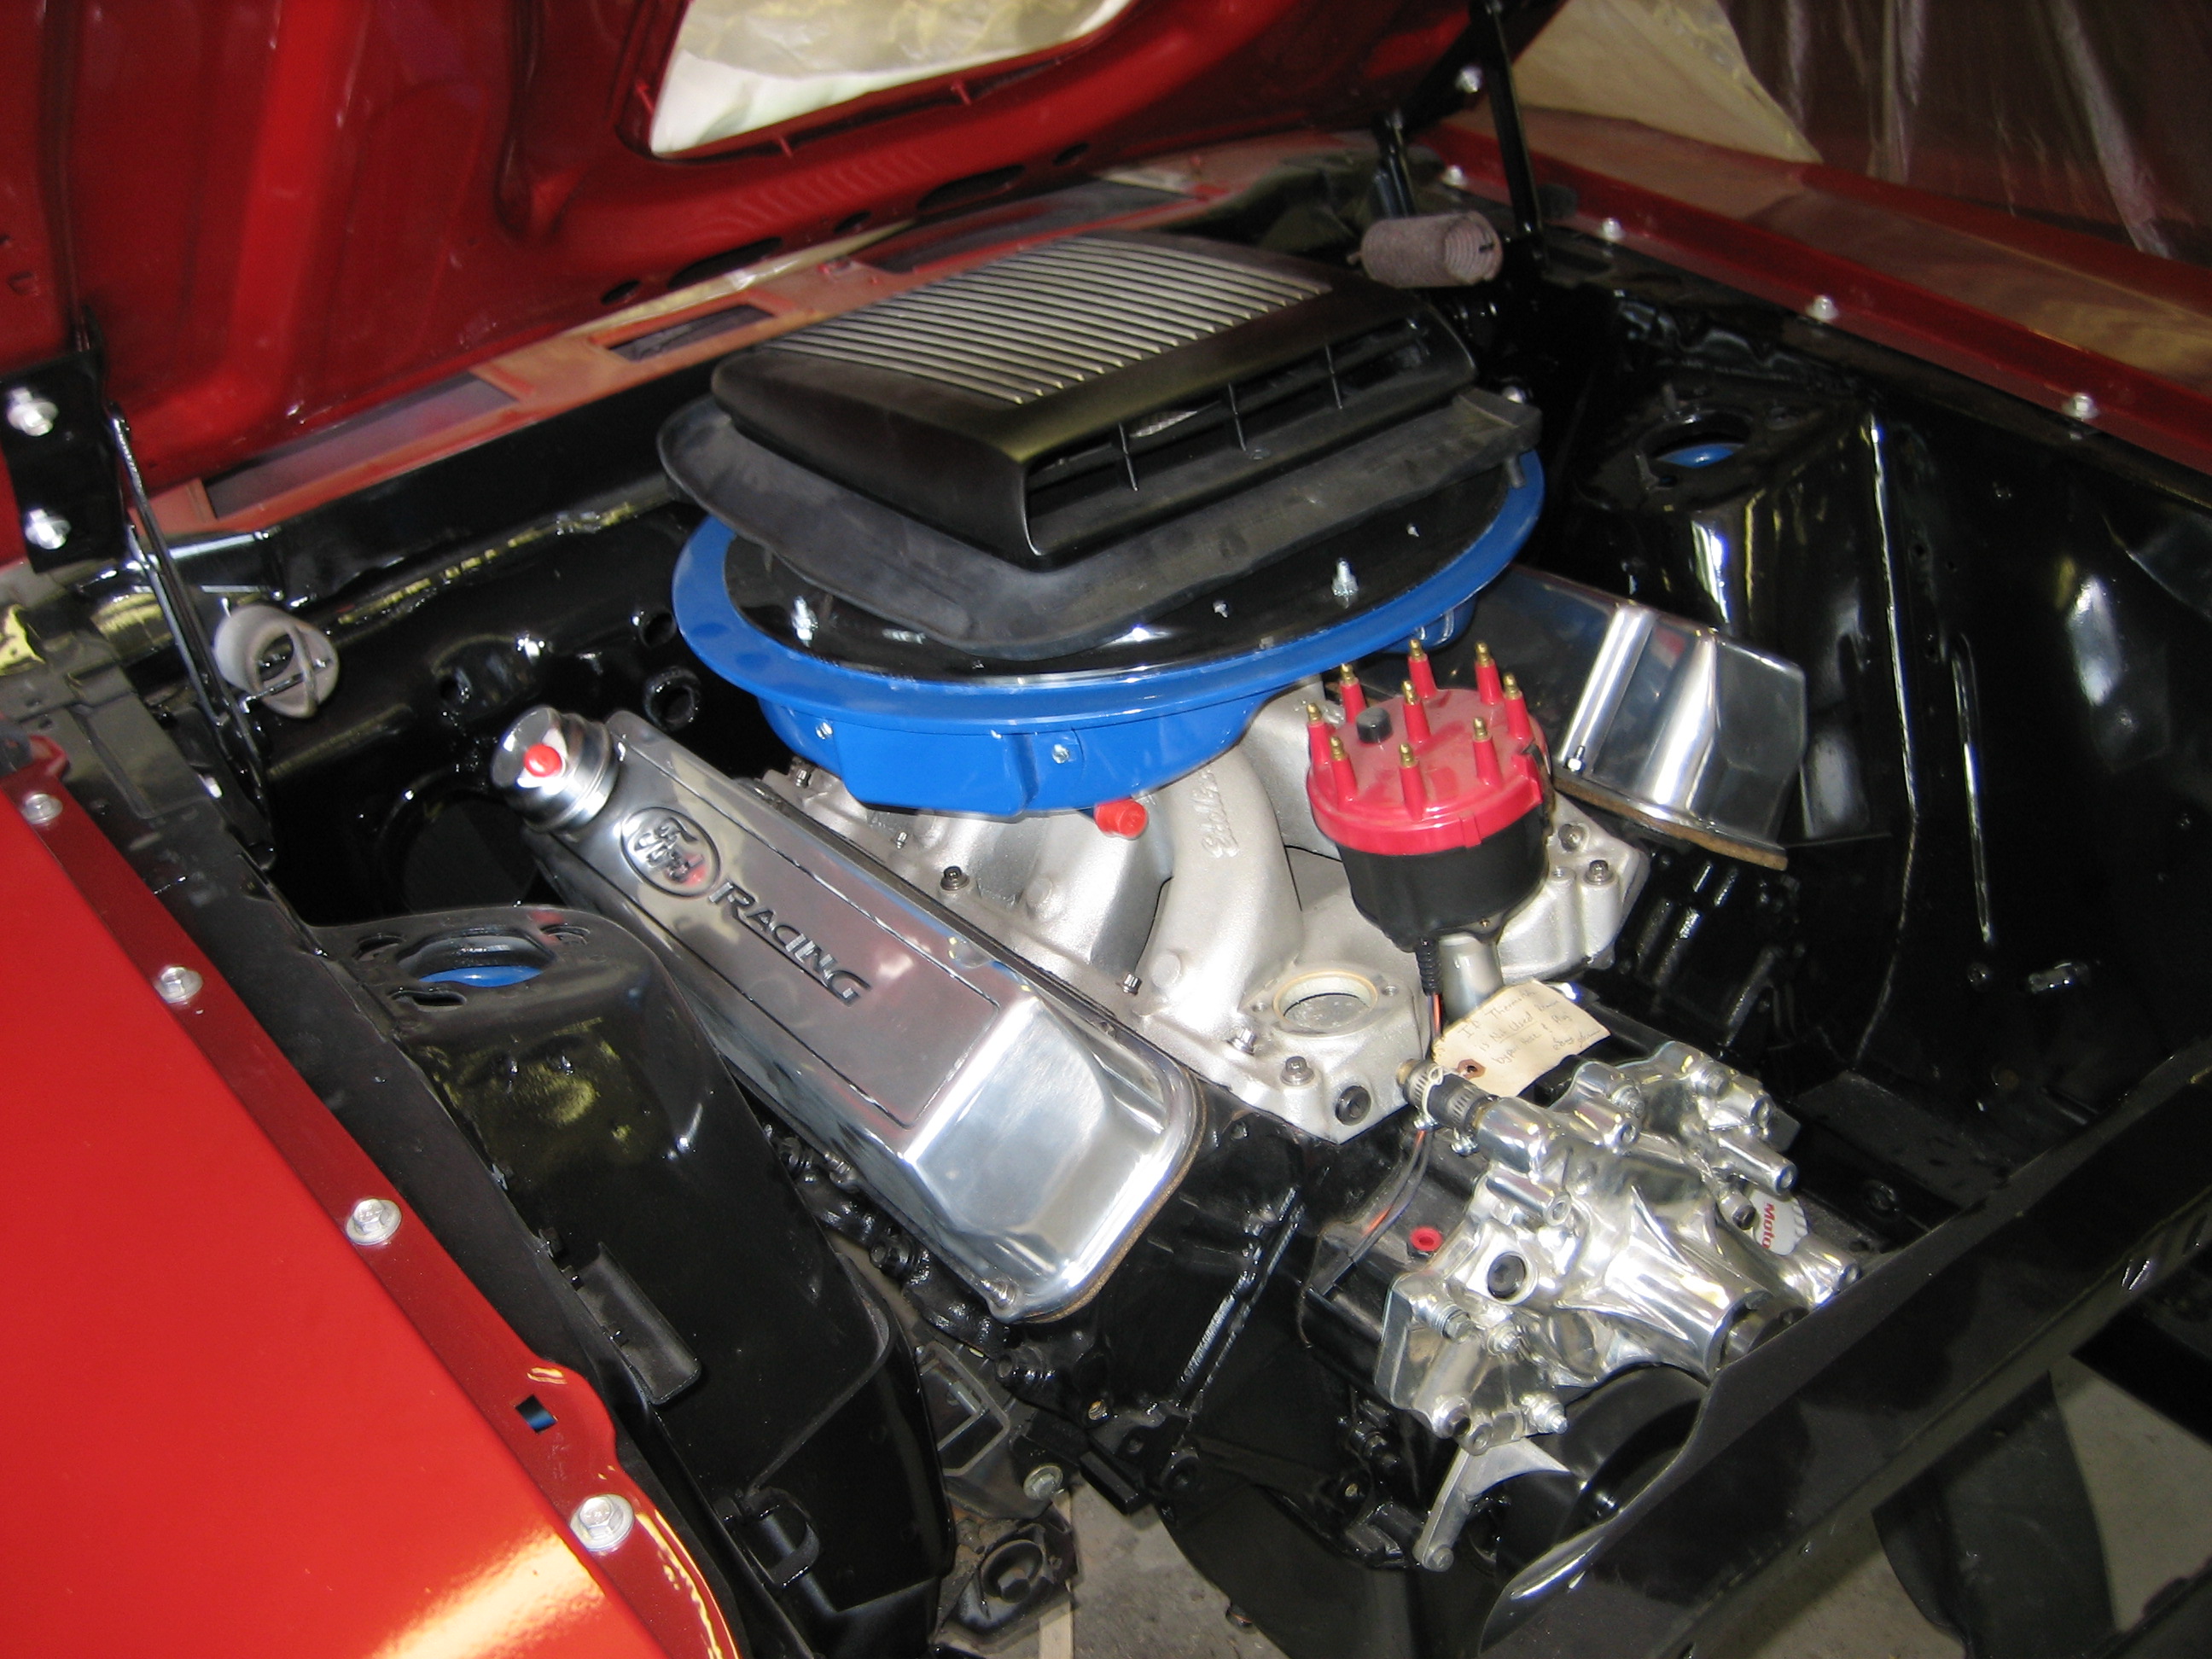 Ford big block parts sales and tech worldwide  Edelbrock victor bbf 460  intake ported to scj port size up for sale on